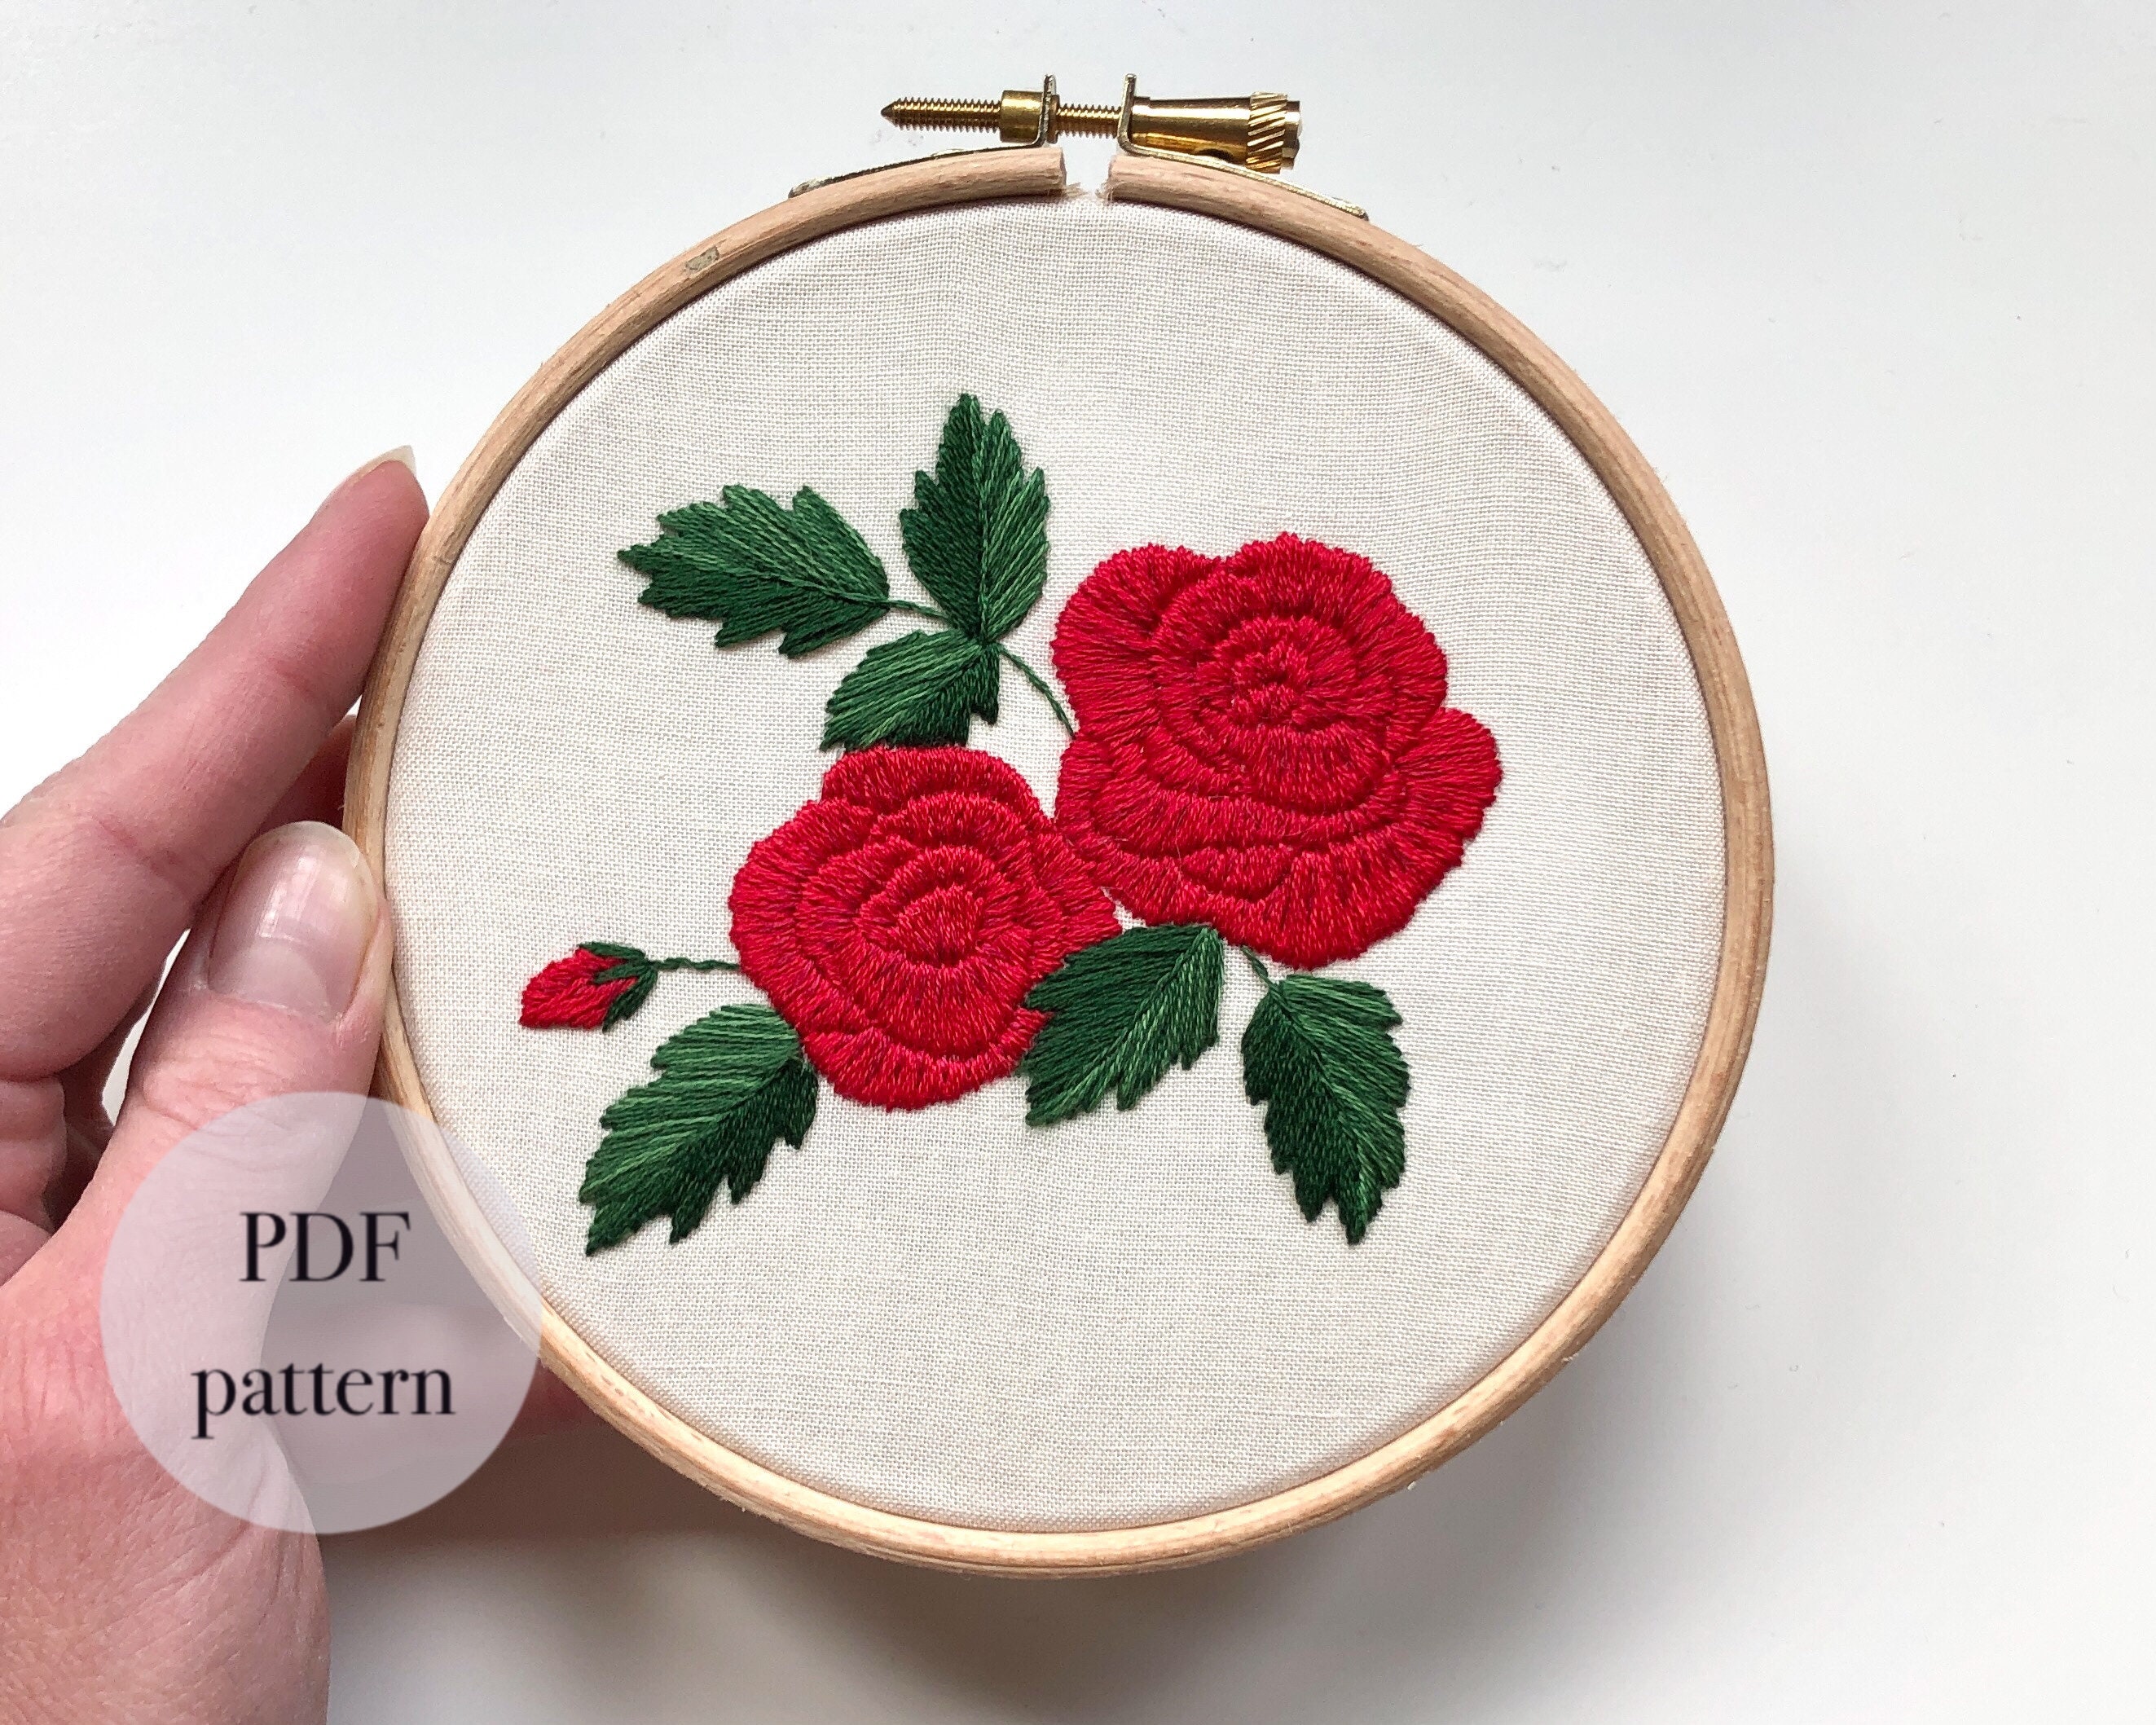 Red Roses Hand Embroidery Kit (Long & Short Stitch) – MiuEmbroidery